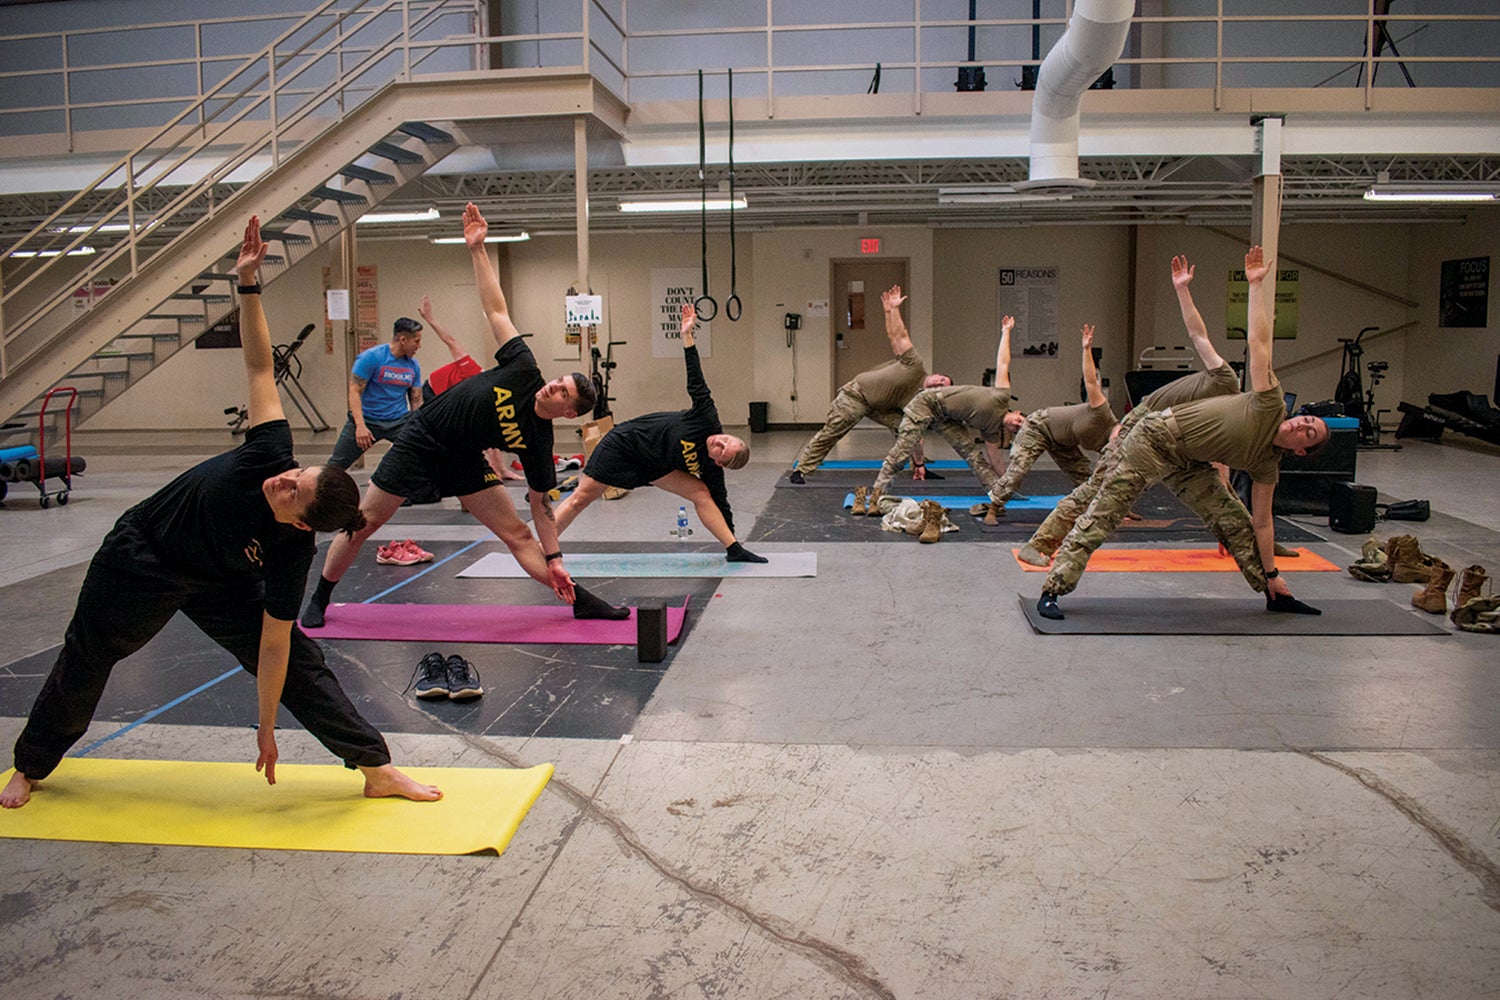 Soldiers take a combat mobility yoga class at Joint Base Lewis-McChord, Washington. (Credit: U.S. Army/Sgt. Casey Hustin)